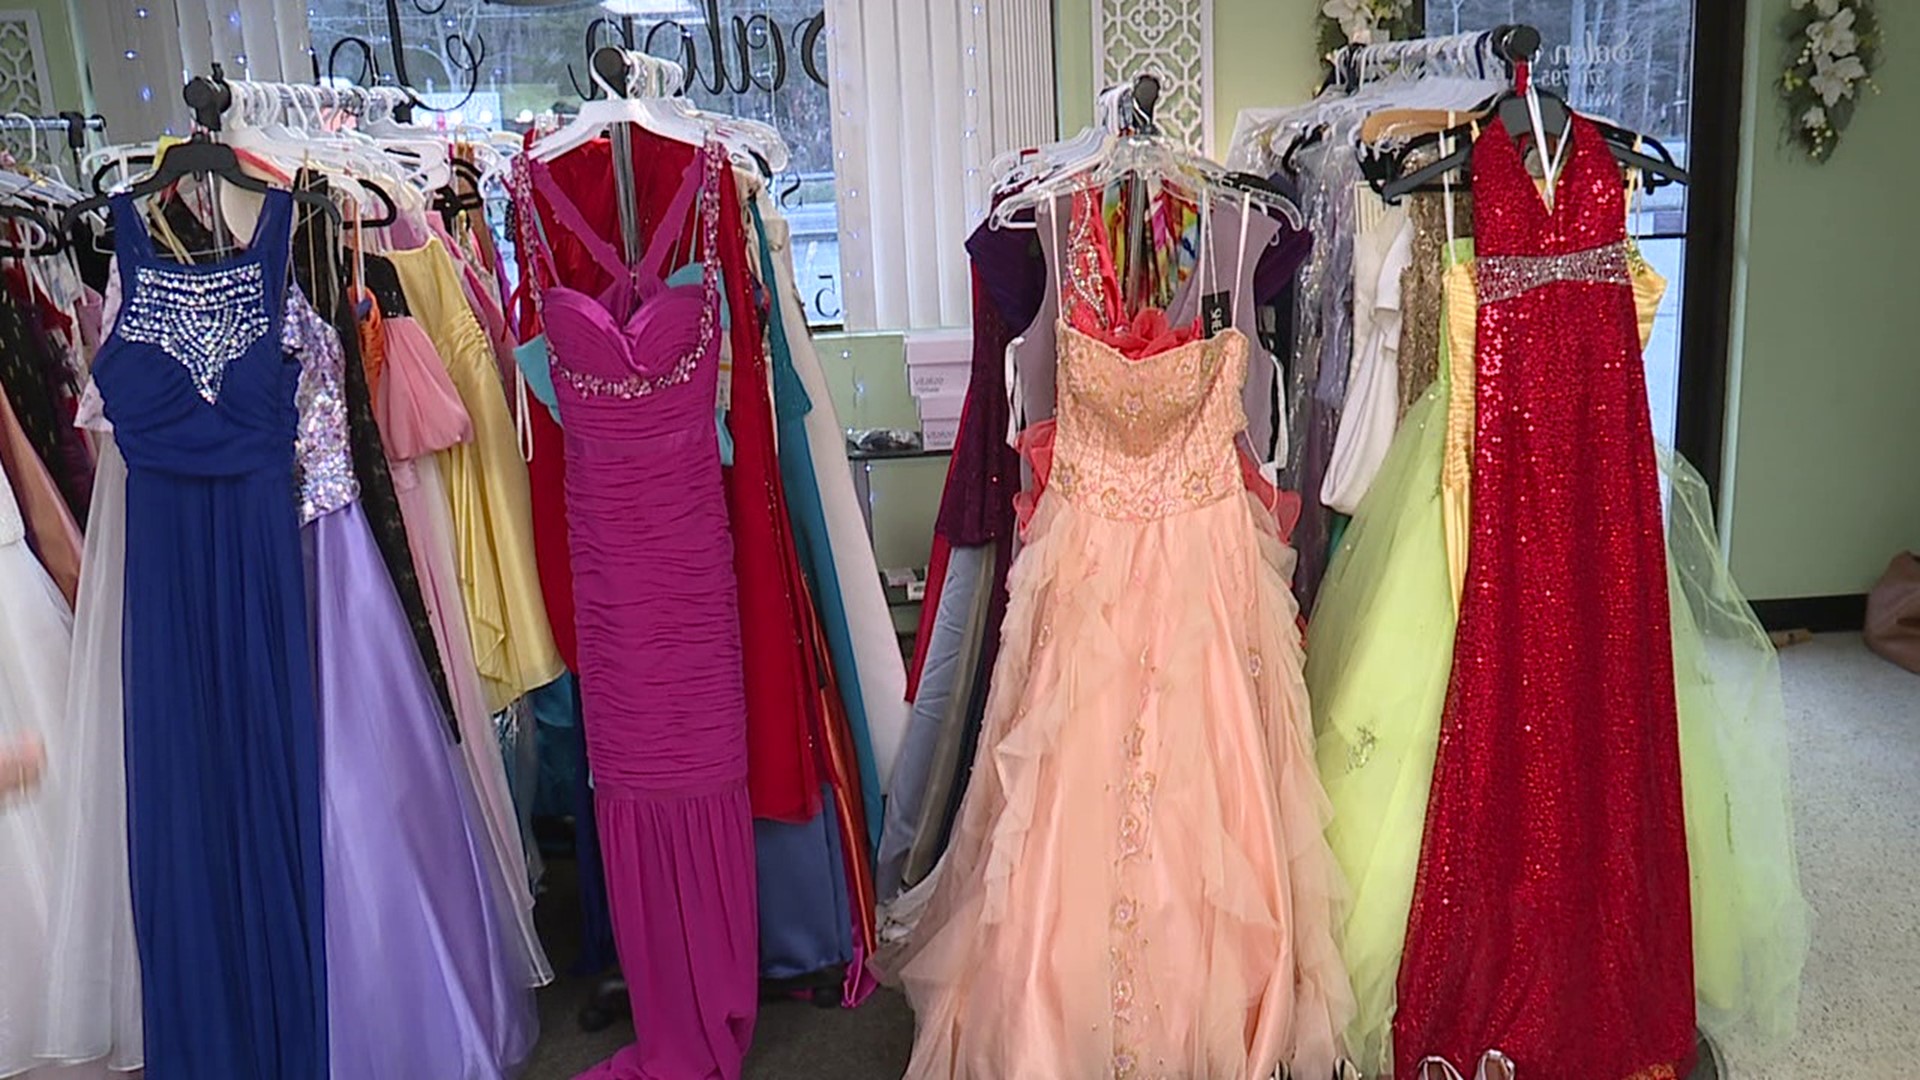 A hair salon in Wayne County has been collecting dresses, suits, ties, and shoes to give away this weekend as part of its fourth annual Prom Dress Drive.